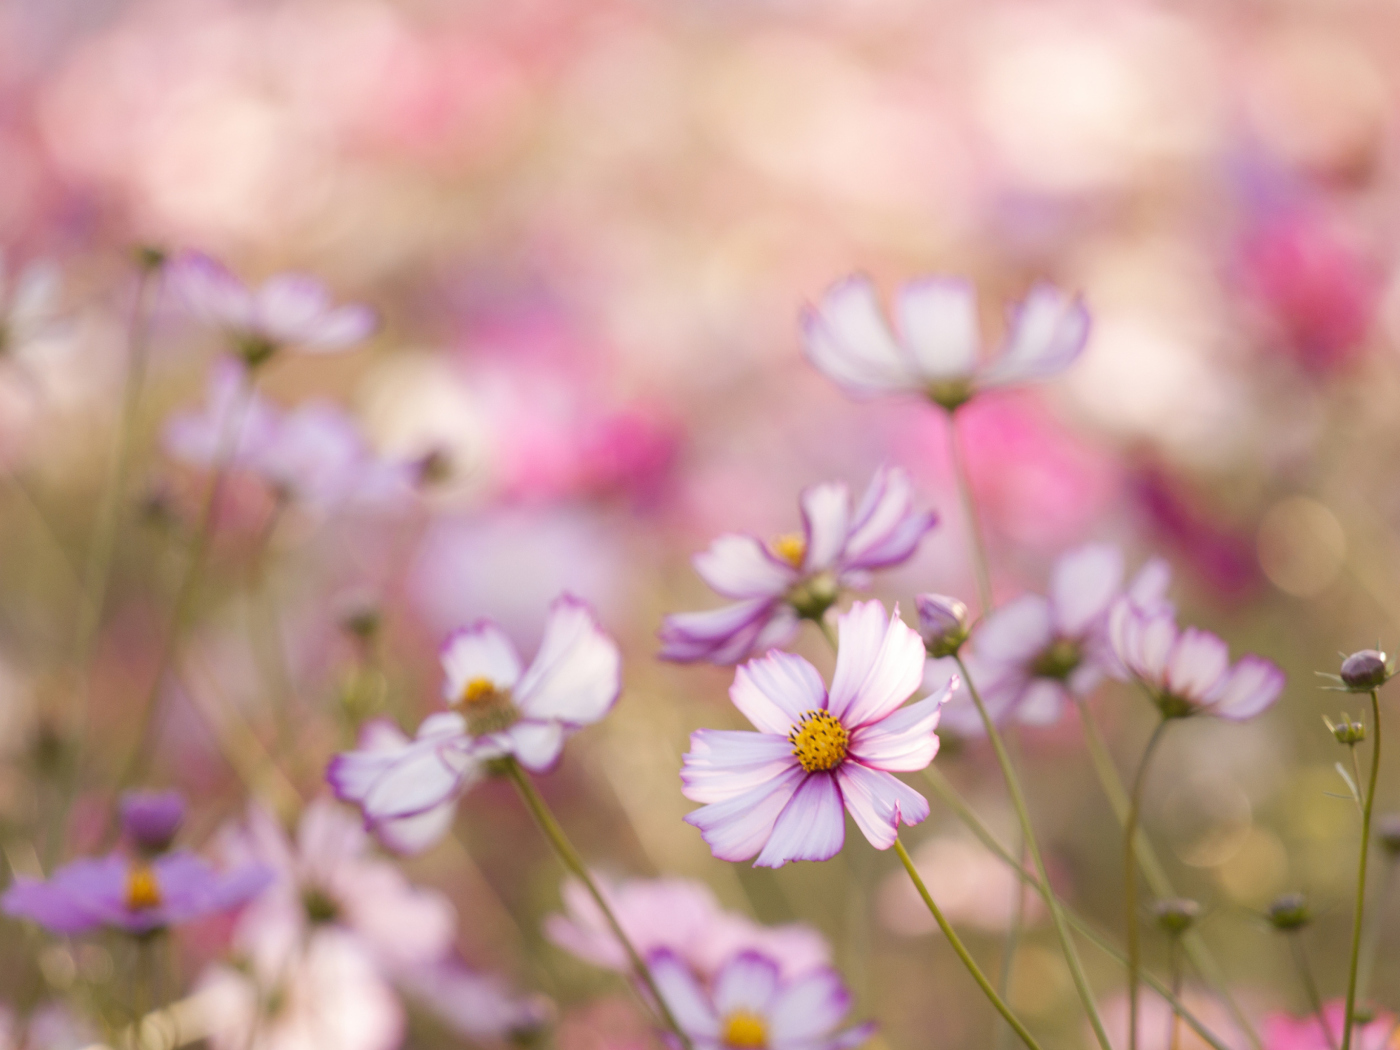 Field Of White And Pink Petals wallpaper 1400x1050